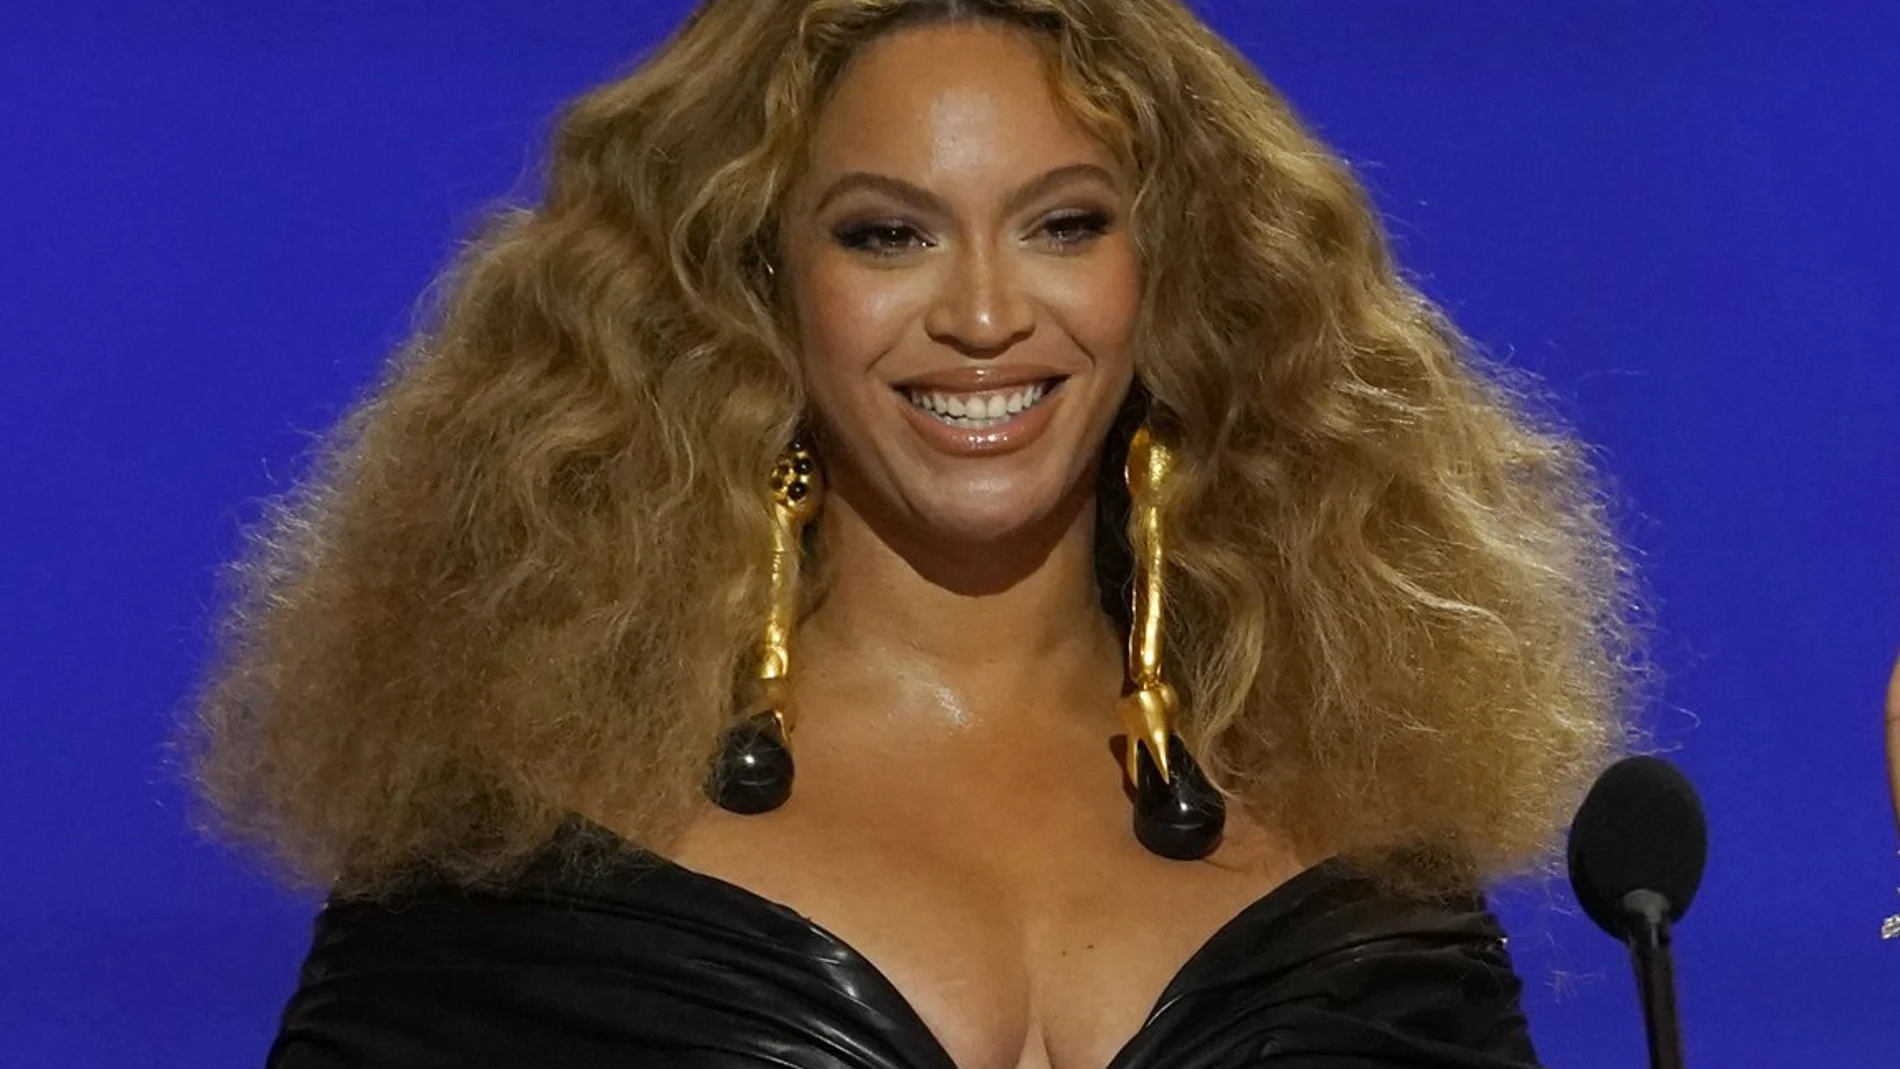 FILE - Beyonce appears at the 63rd annual Grammy Awards in Los Angeles on March 14, 2021. BeyoncÃ© has revealed the title and release date for her next album, with the 16-track â€œRenaissanceâ€ set to drop on July 29 (AP Photo/Chris Pizzello, File)